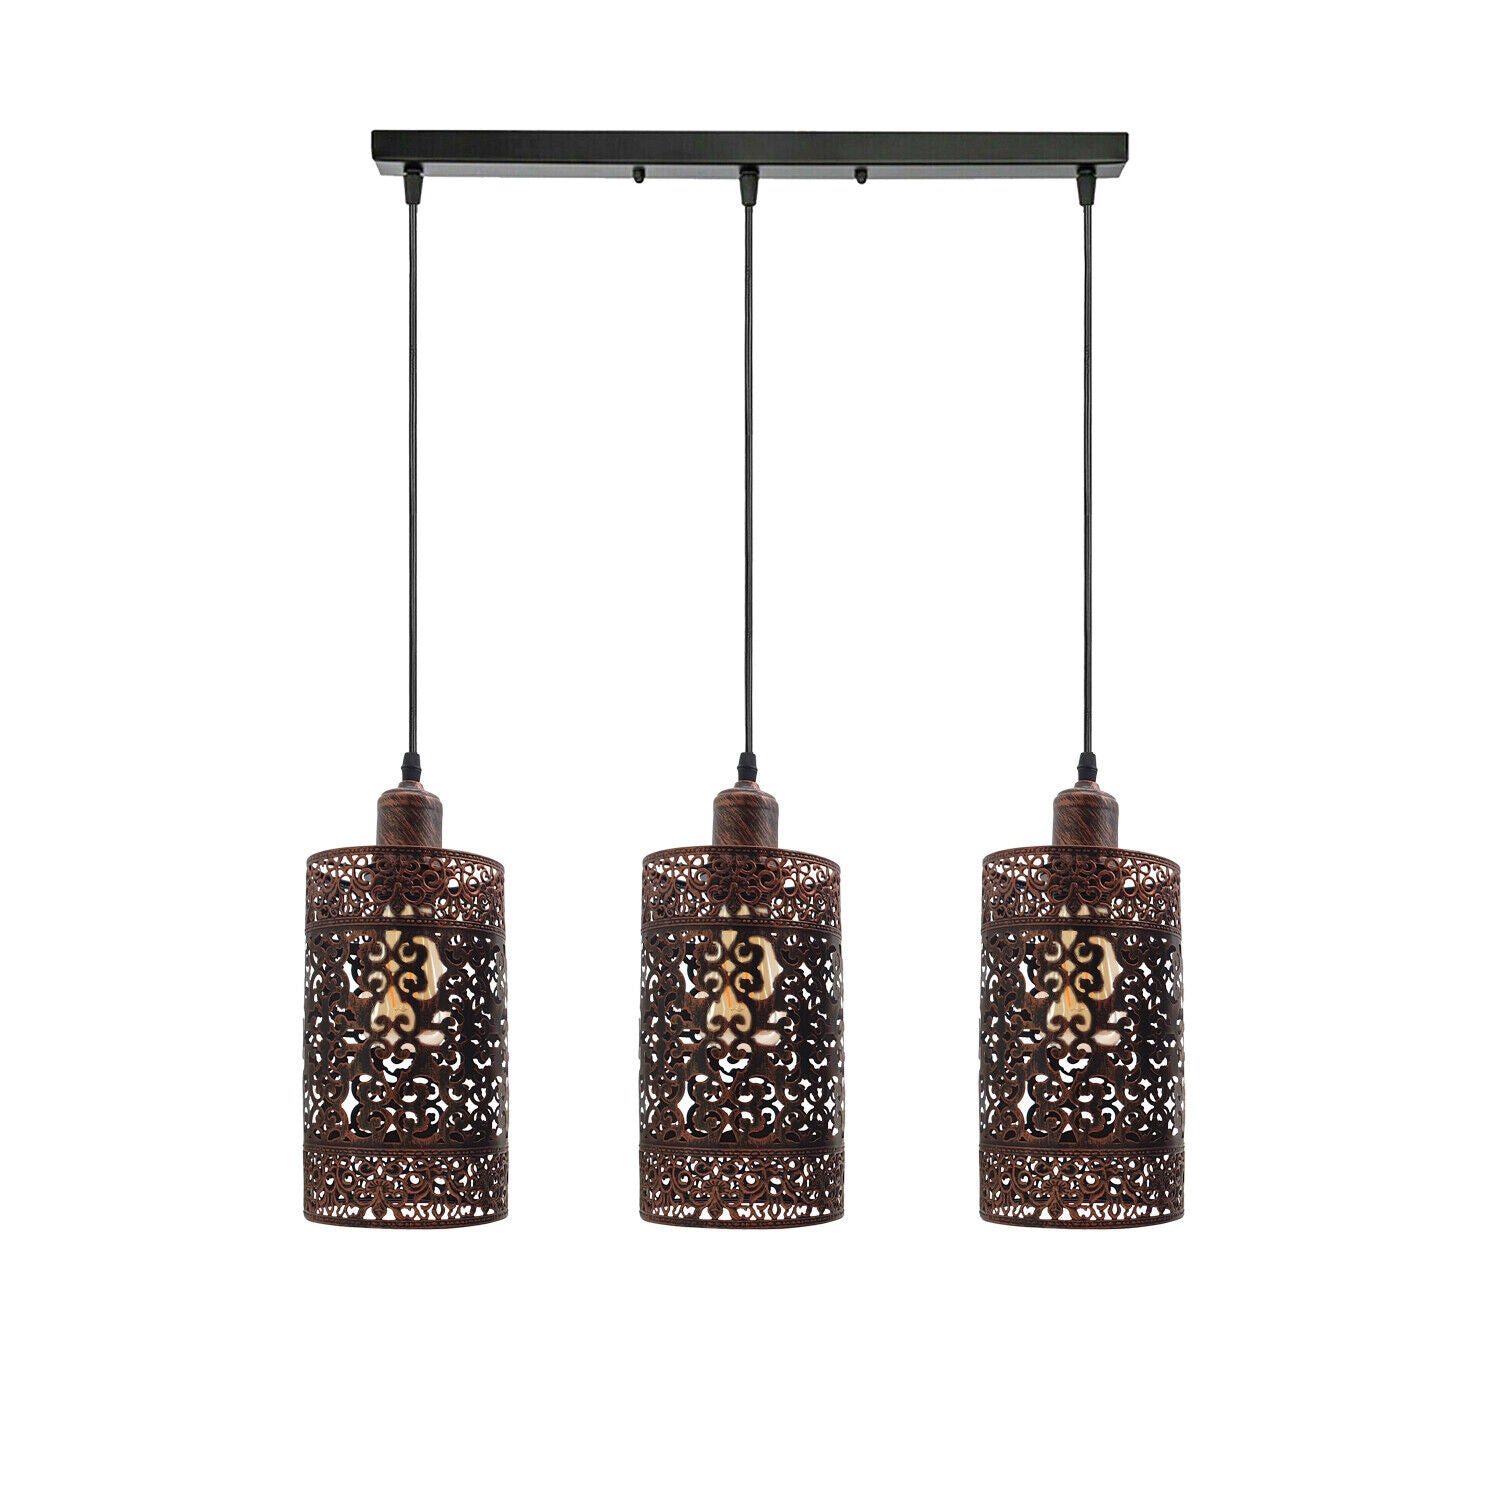 Industrial Modern 3 Way Retro Rustic Red Cage Ceiling Hanging Pendant Shade E27~3759 - LEDSone UK Ltd